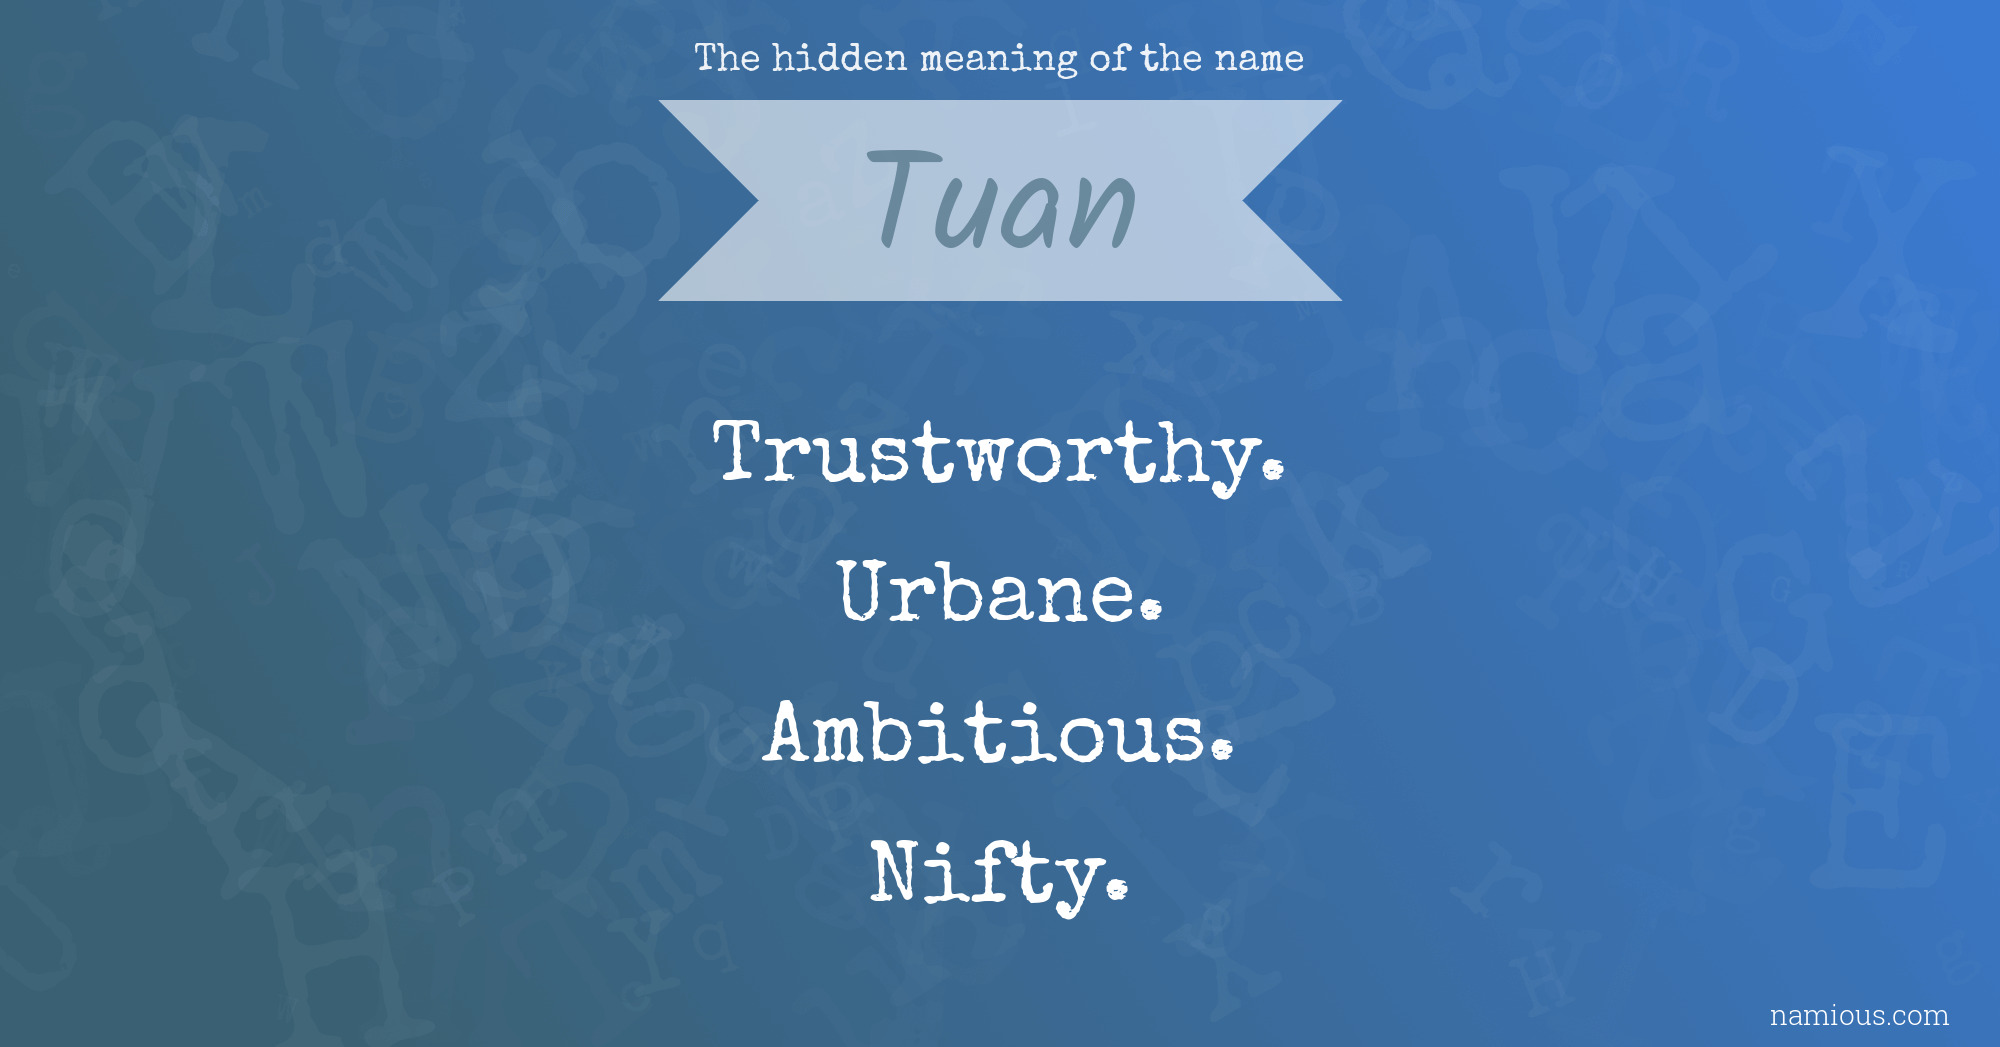 The hidden meaning of the name Tuan